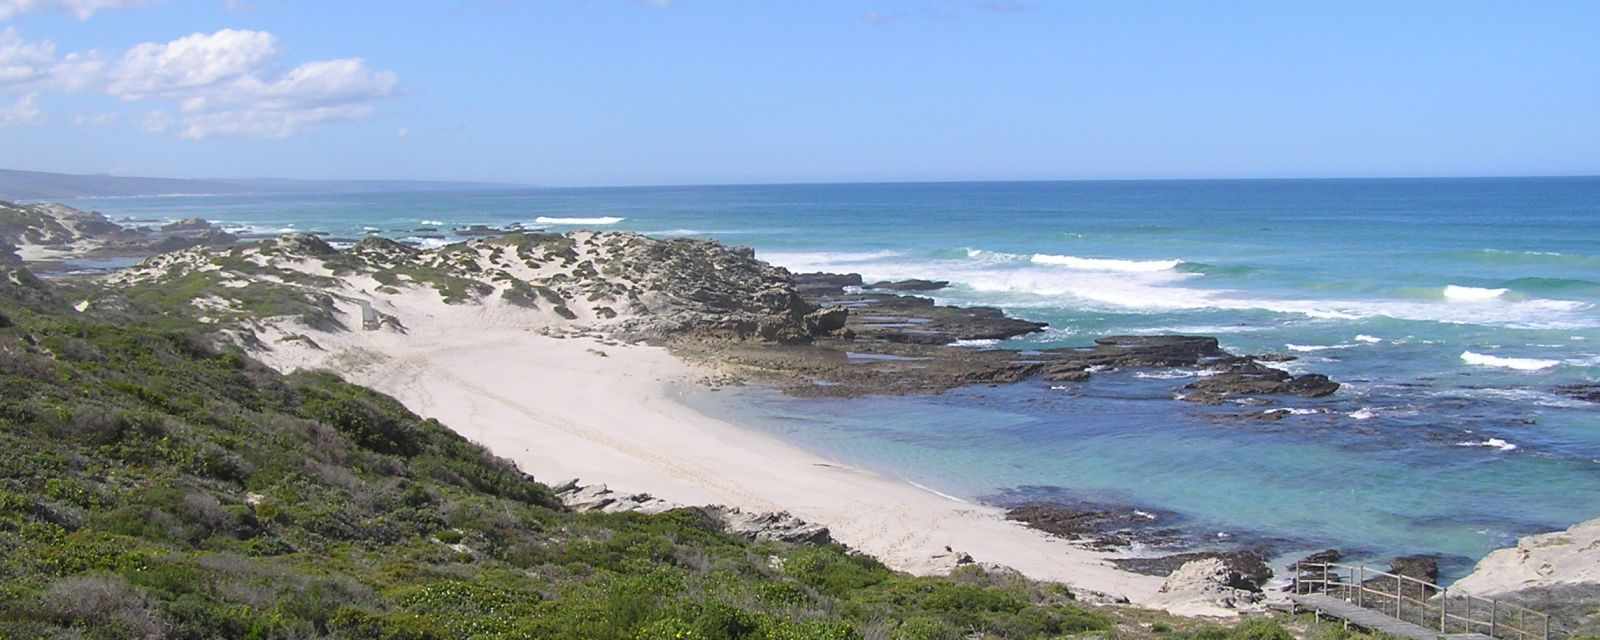 De Hoop - One of the Most Beautiful Reserves on Earth